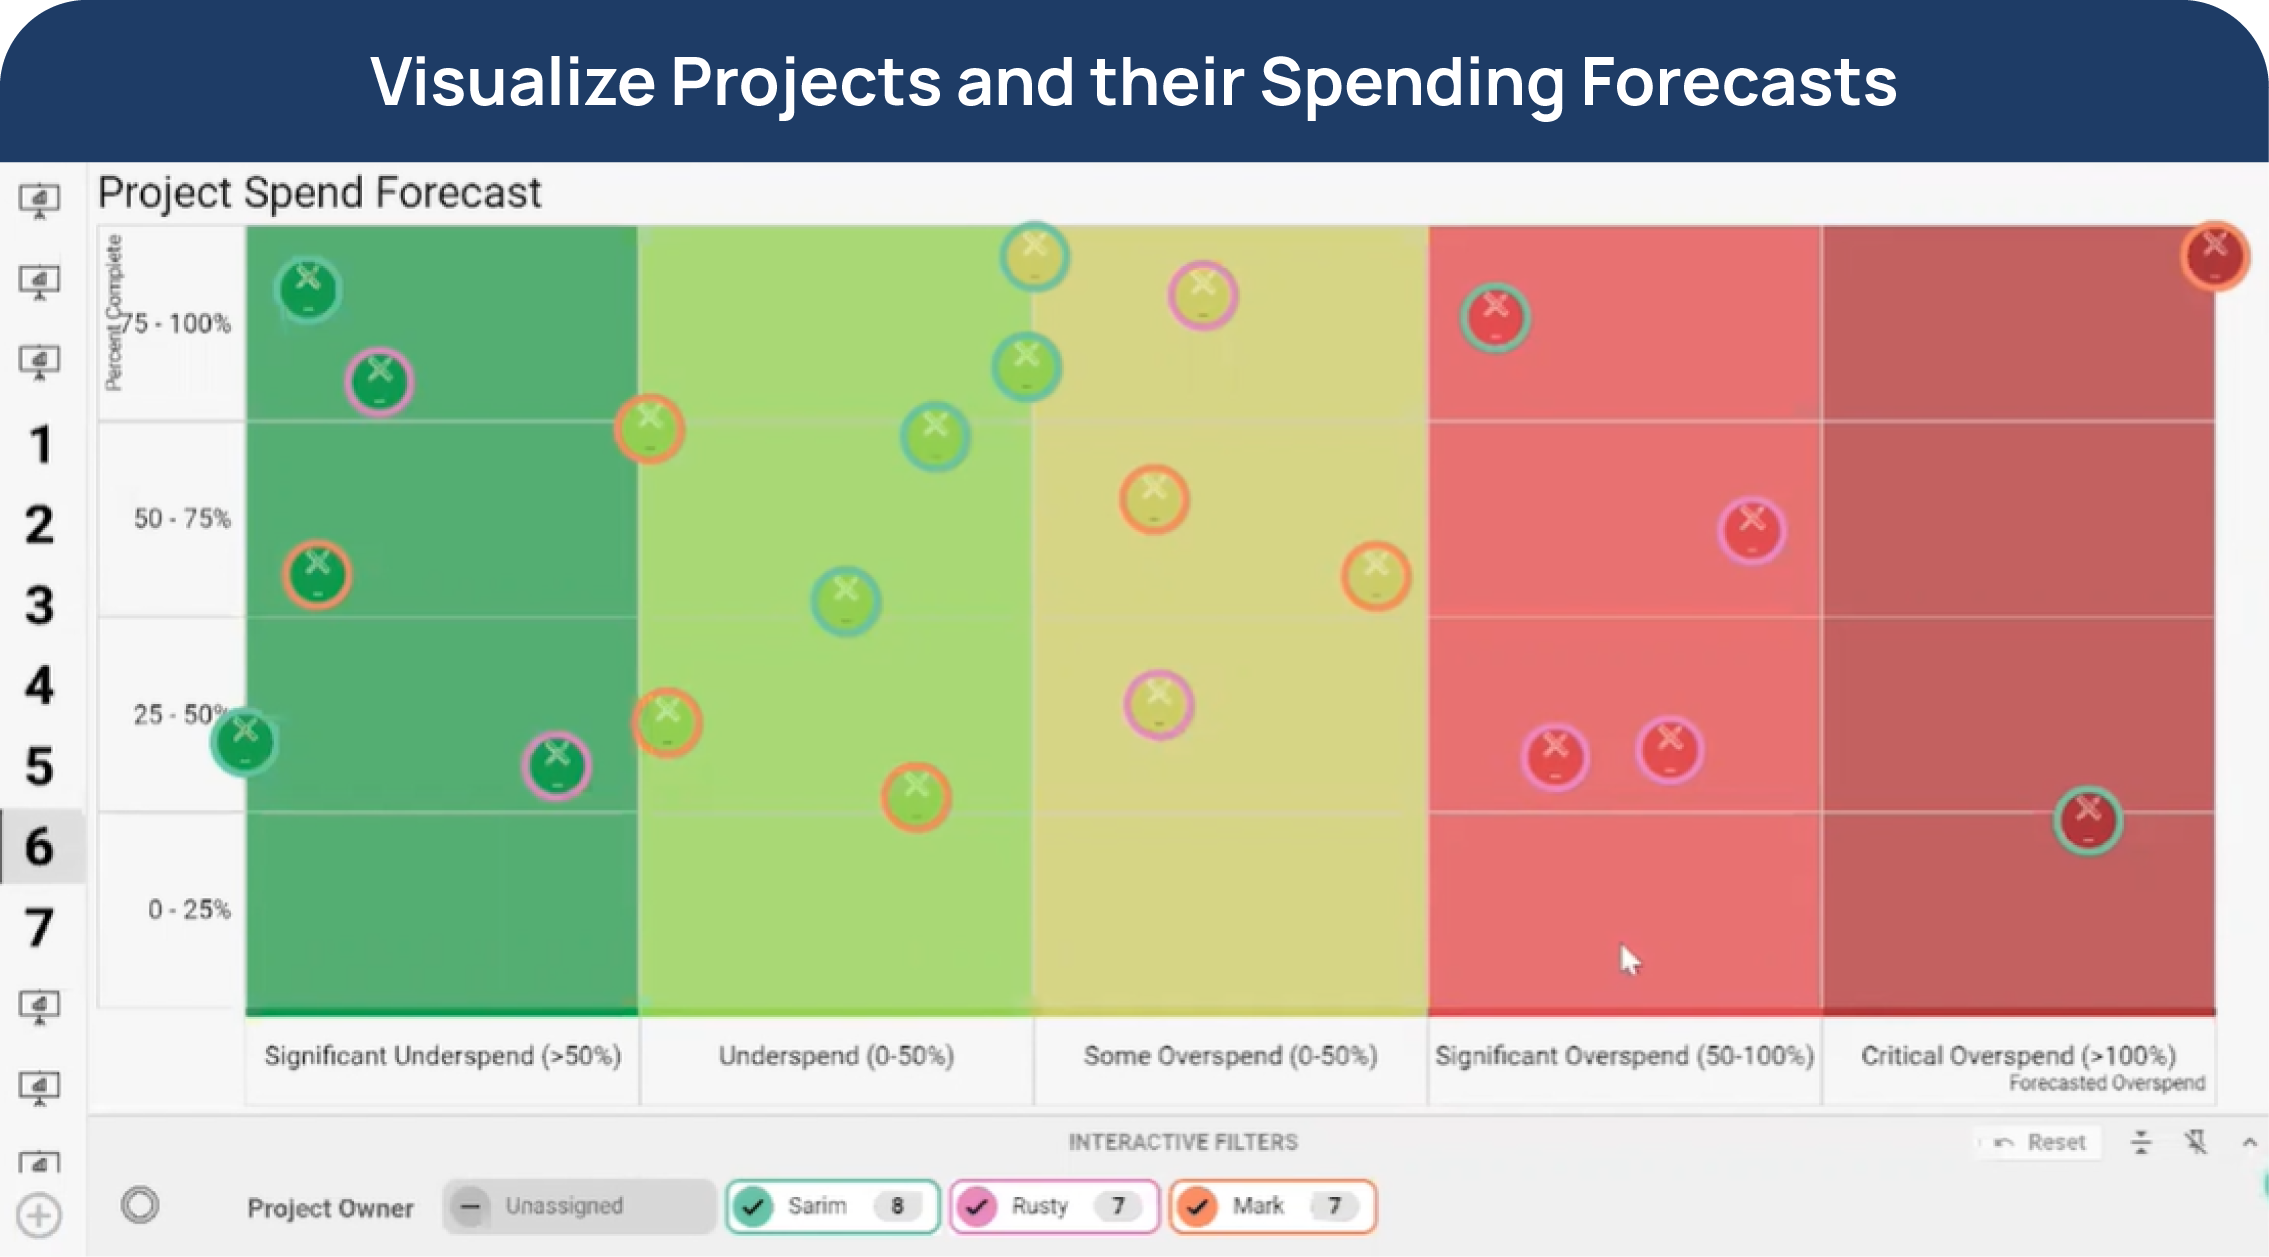 Visualize Projects and Spending Forecasts